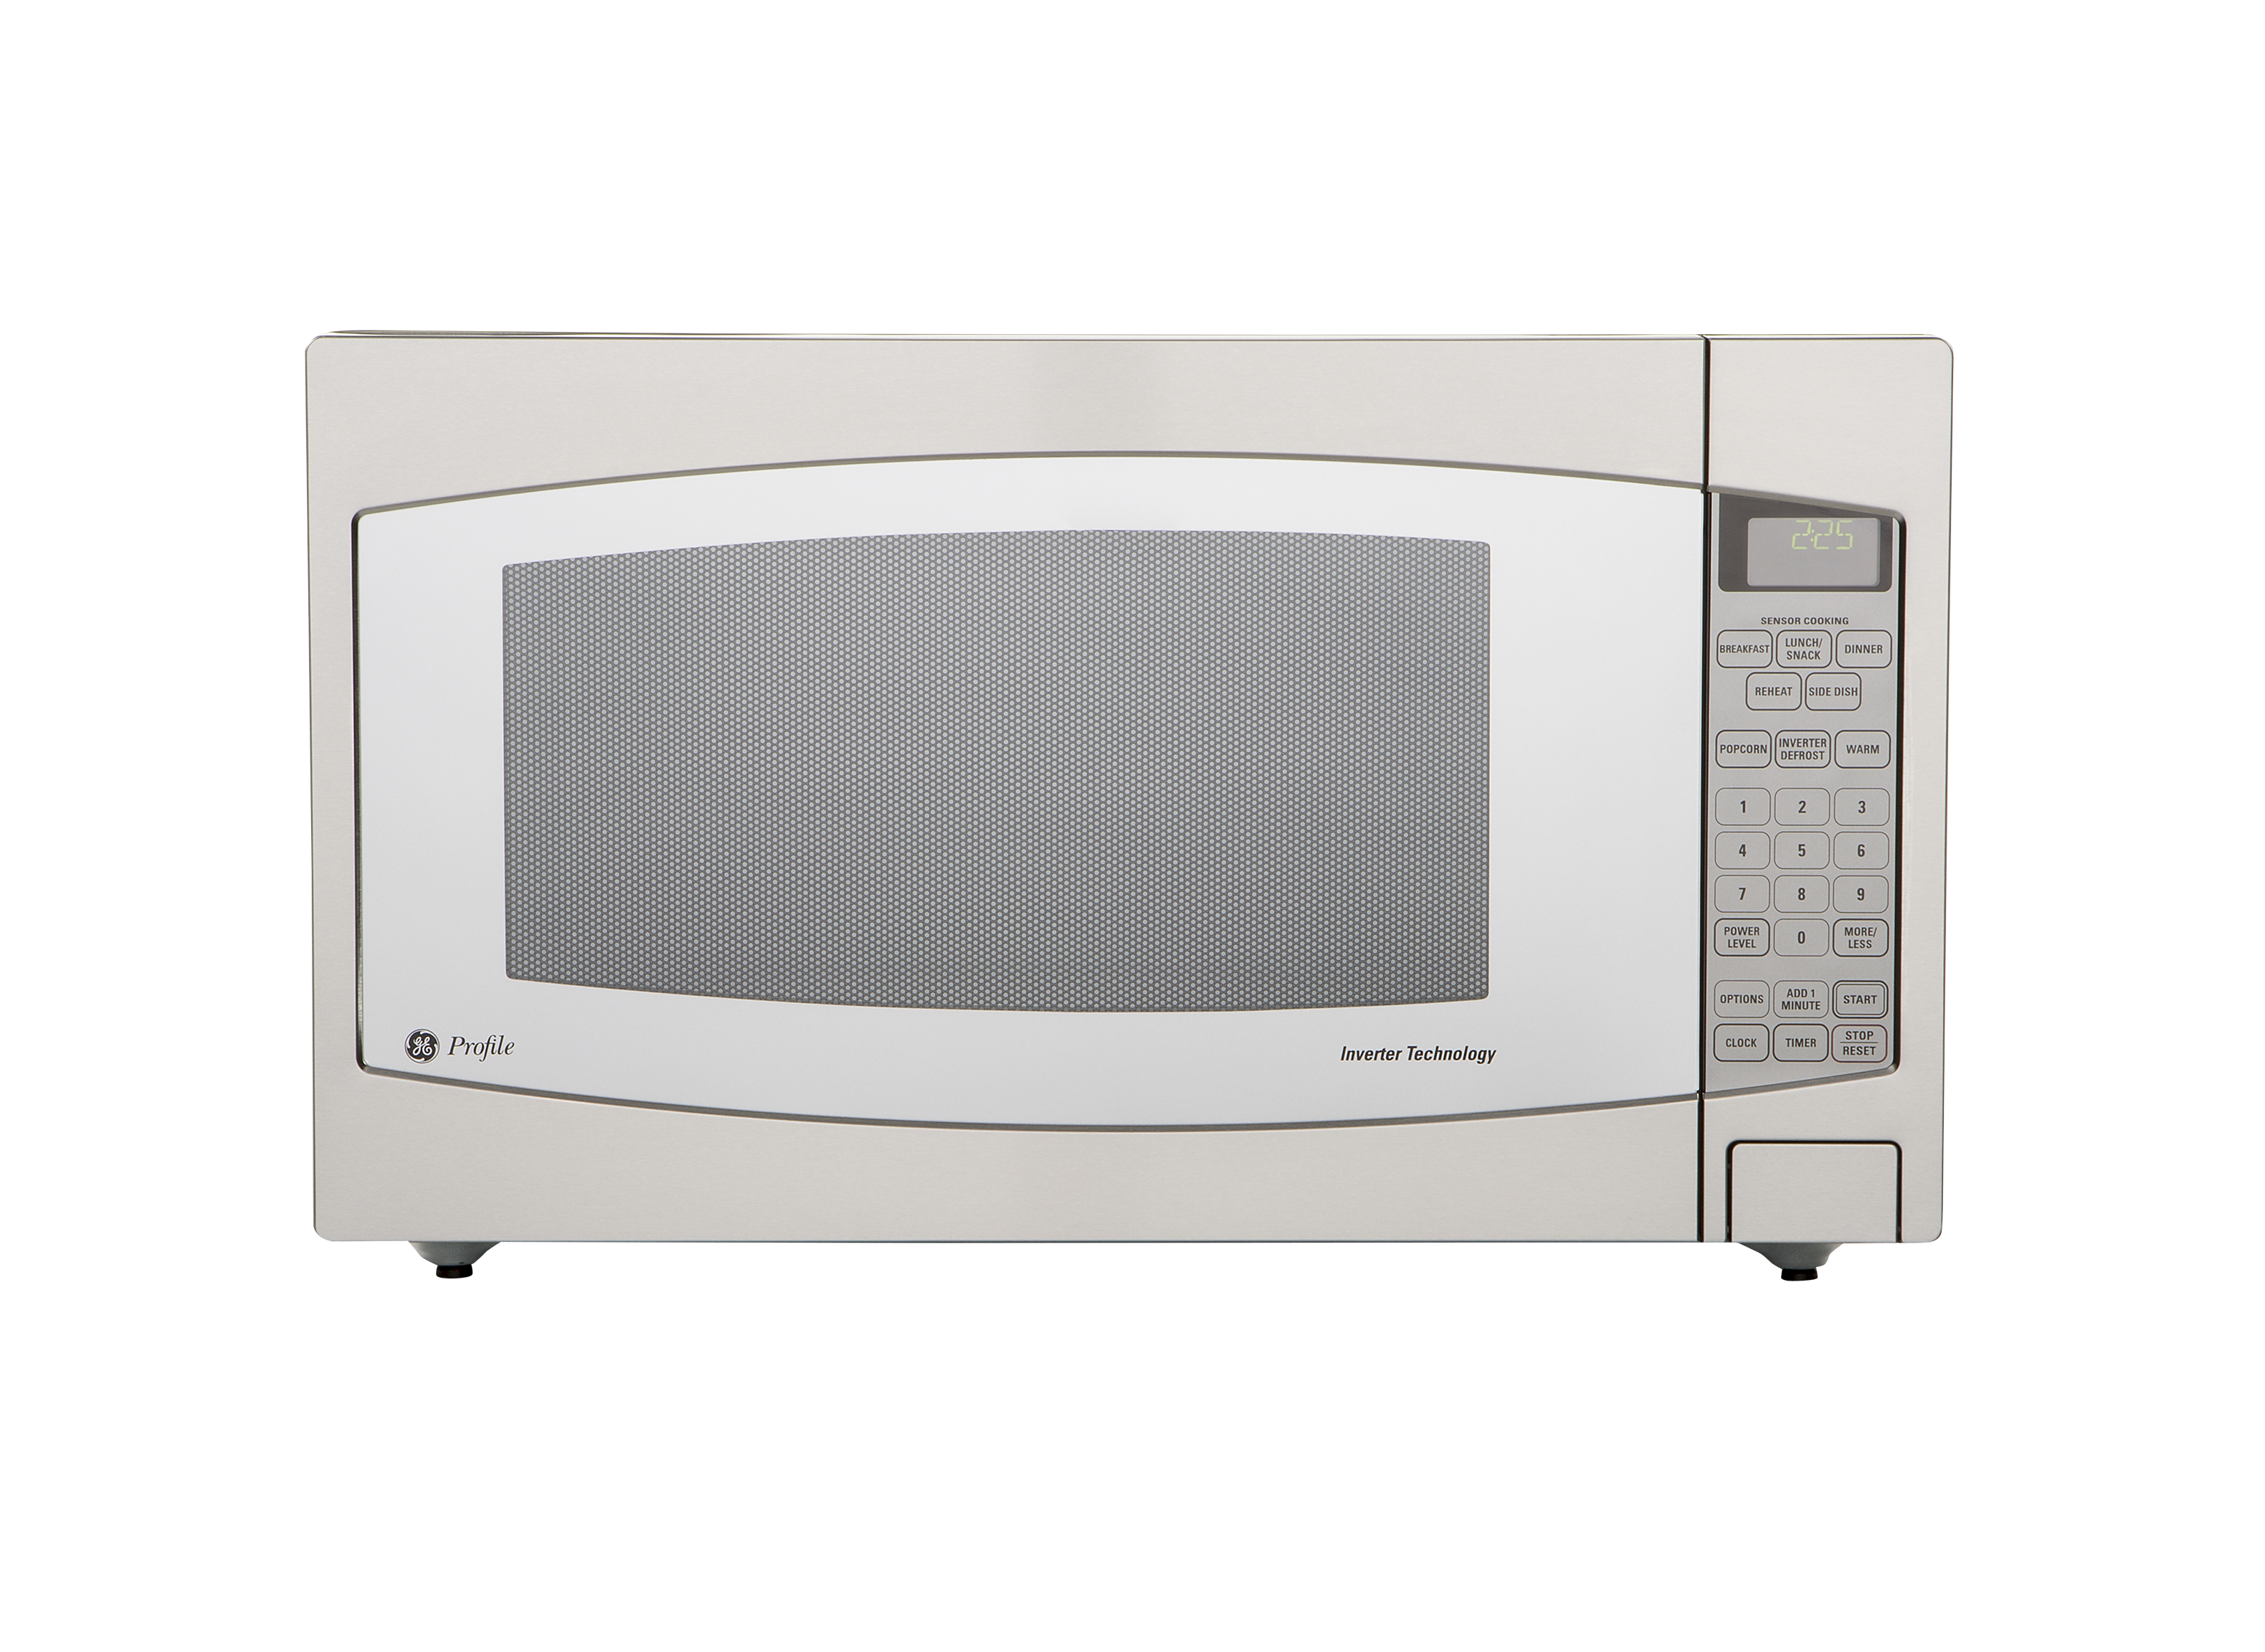 https://crdms.images.consumerreports.org/prod/products/cr/models/123530-countertopmicrowaveovens-ge-profilejes2251sjss.png